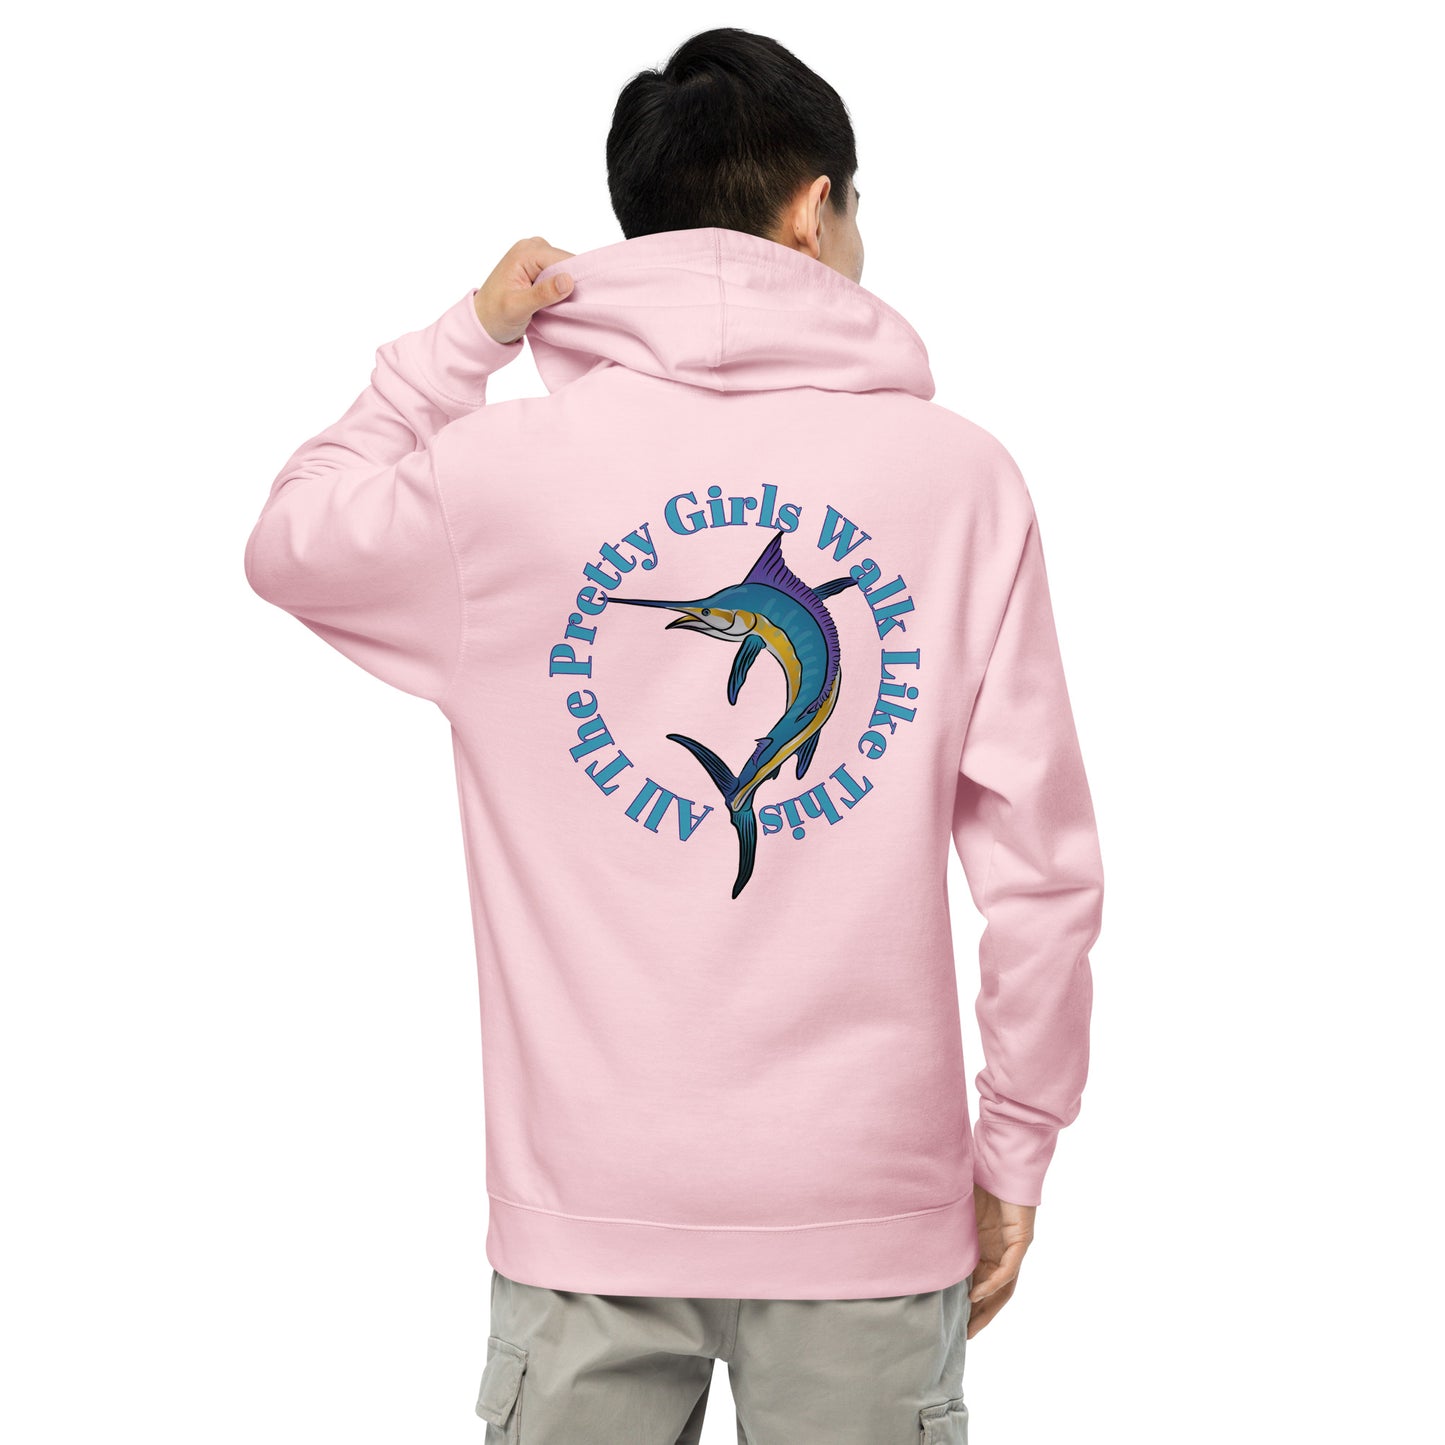 All The Pretty Girls Unisex midweight hoodie